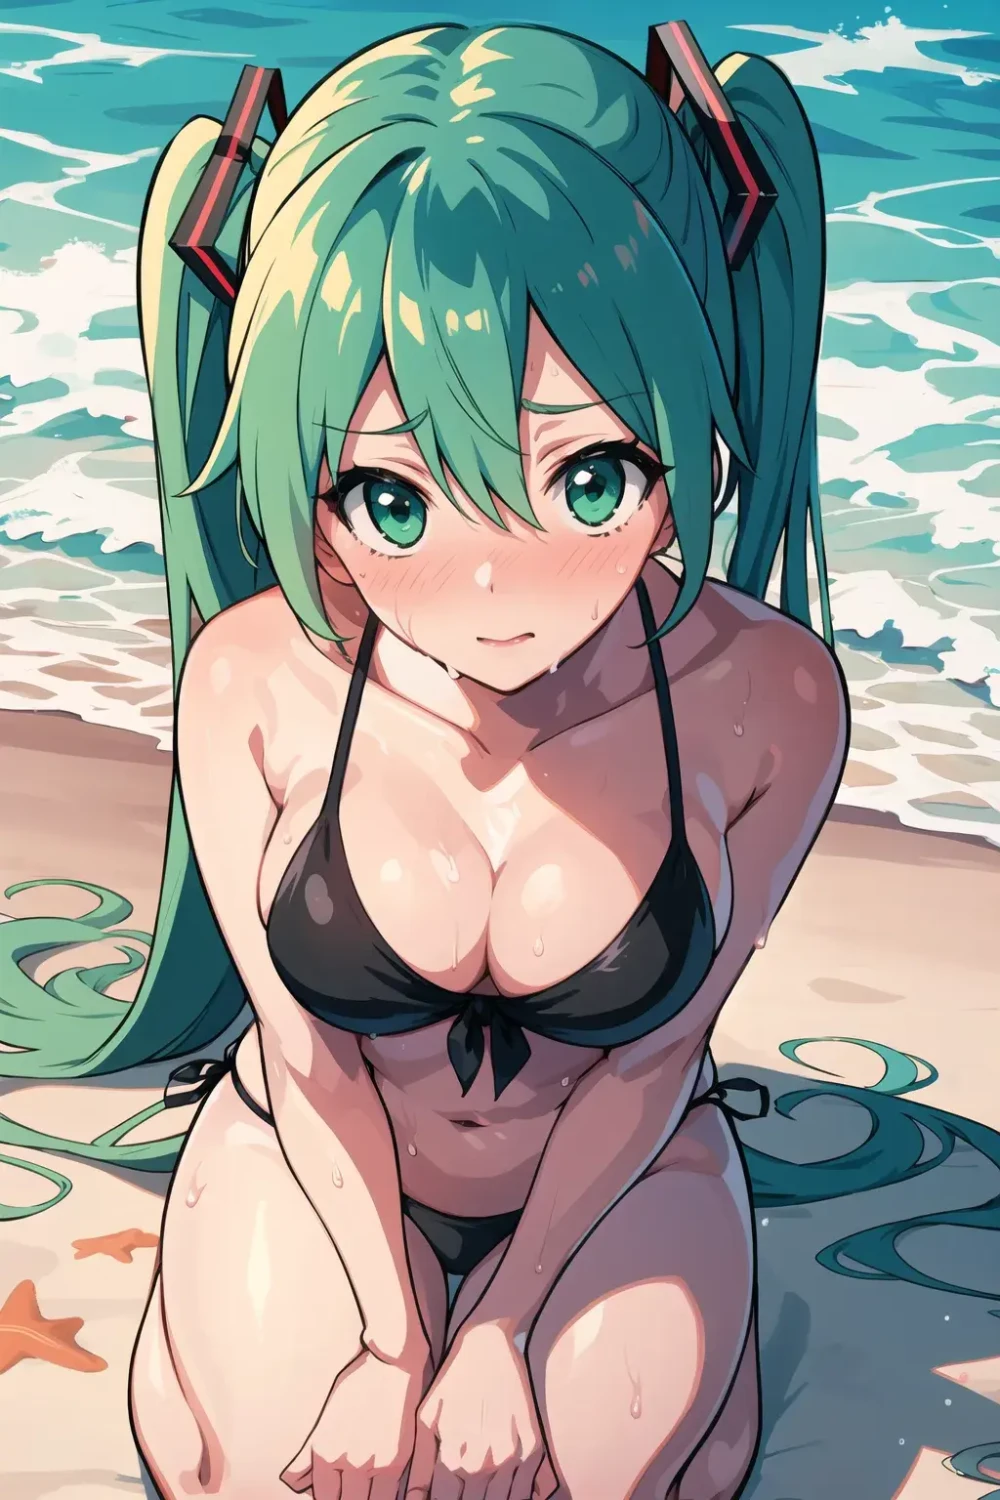 hatsune-miku-anime-style-all-ages-35